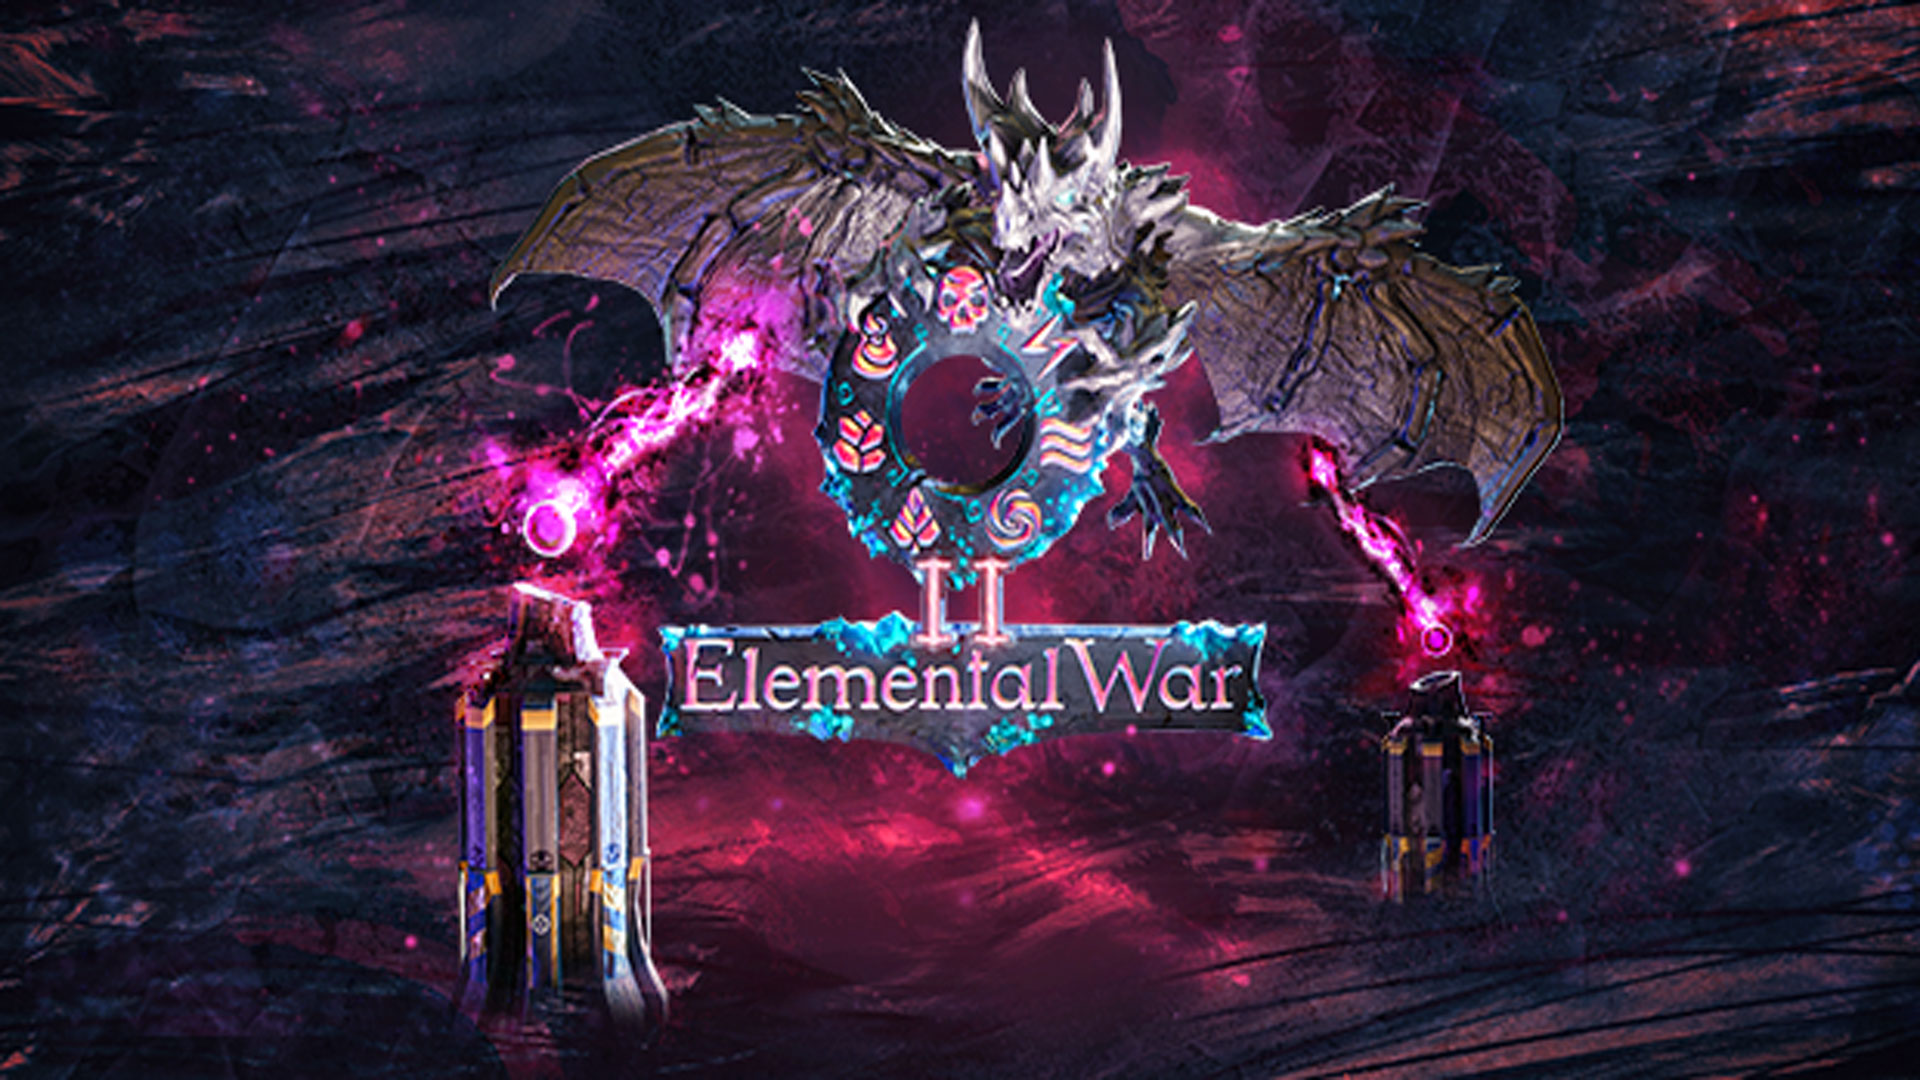 Video For Elemental War 2 Coming May 6 to Xbox One, Xbox Series X